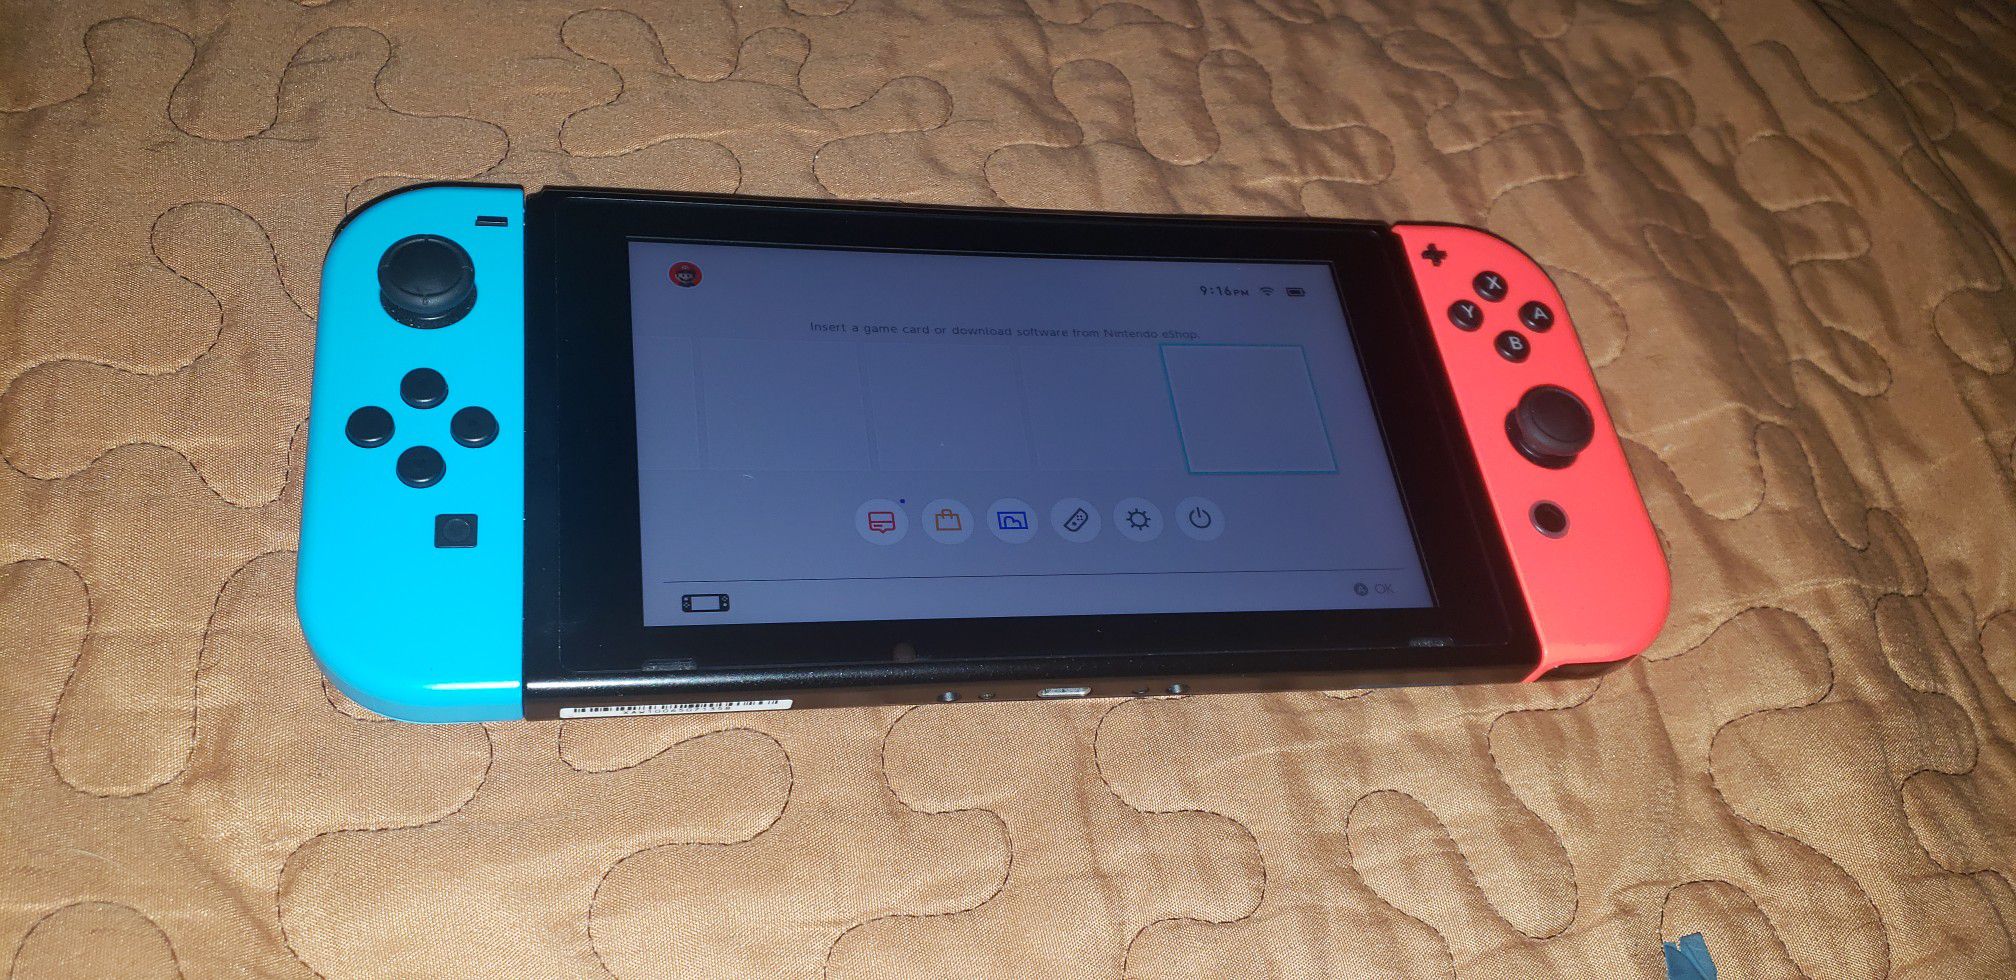 Nintendo switch with extras